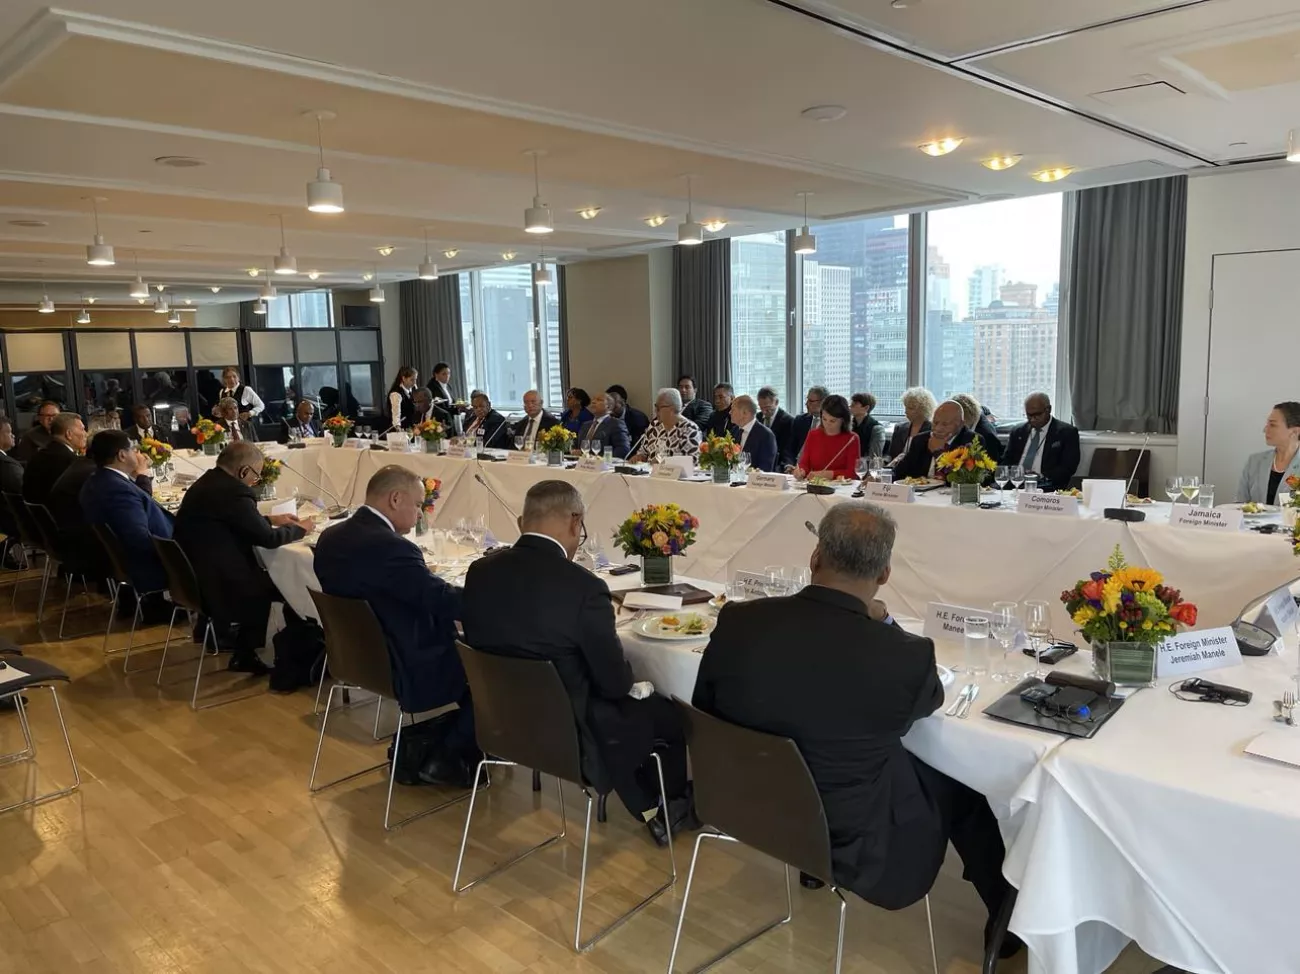 Leaders discuss climate action, small island developing states, and mobilising climate finance at UNGA78 